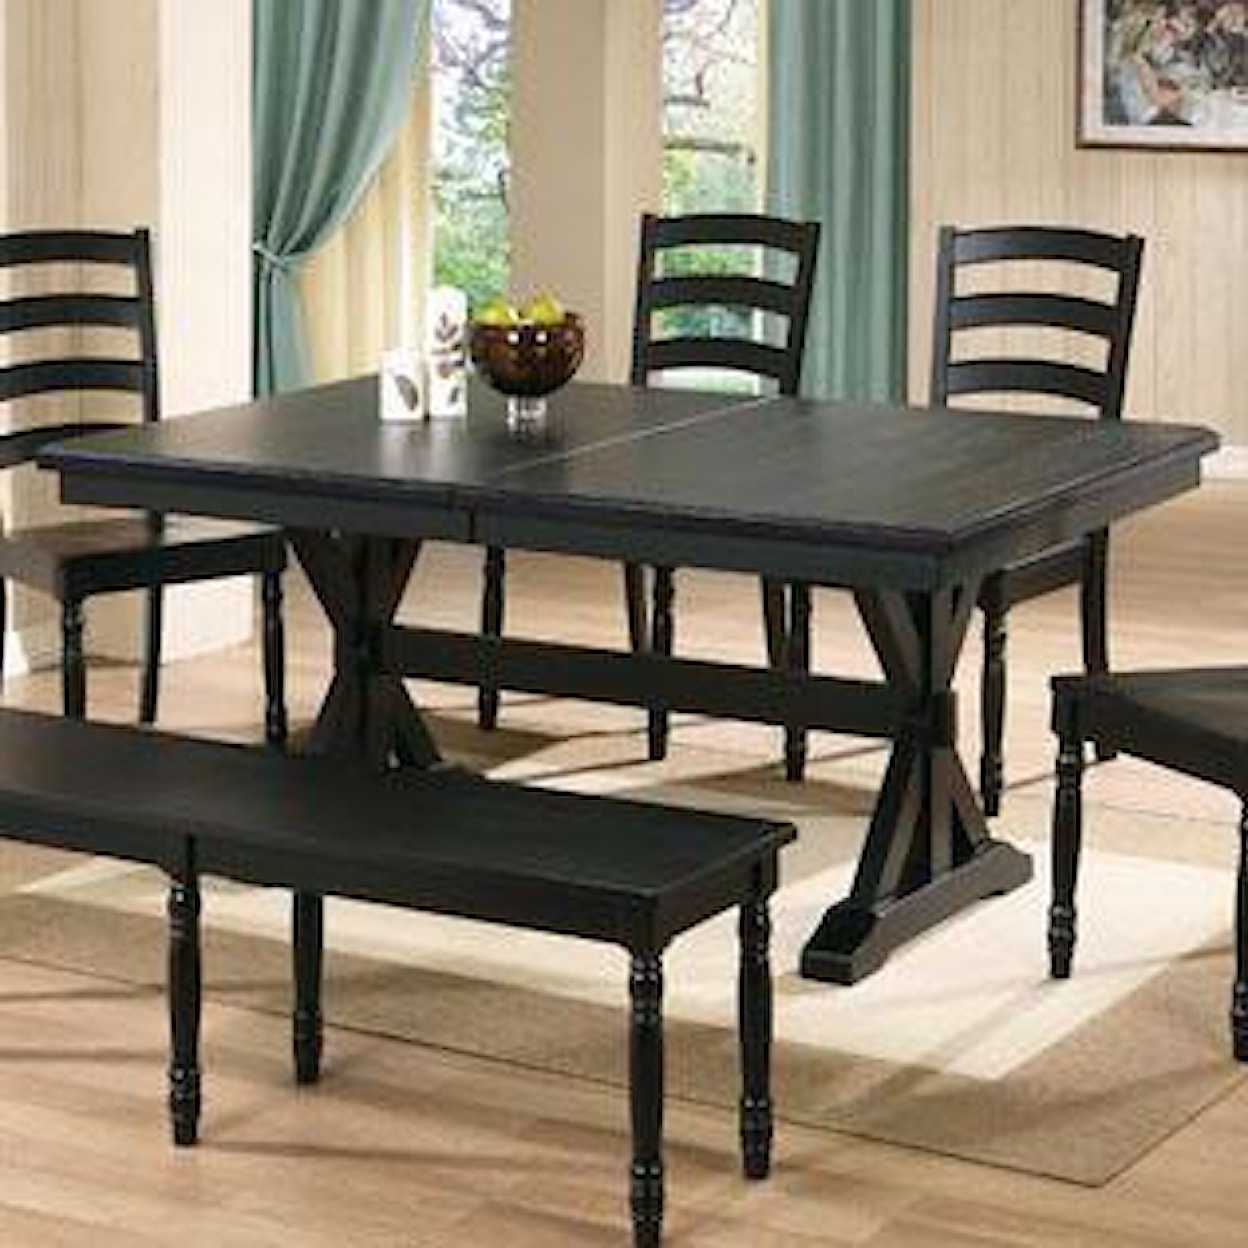 Winners Only Quails Run 84" Dining Table